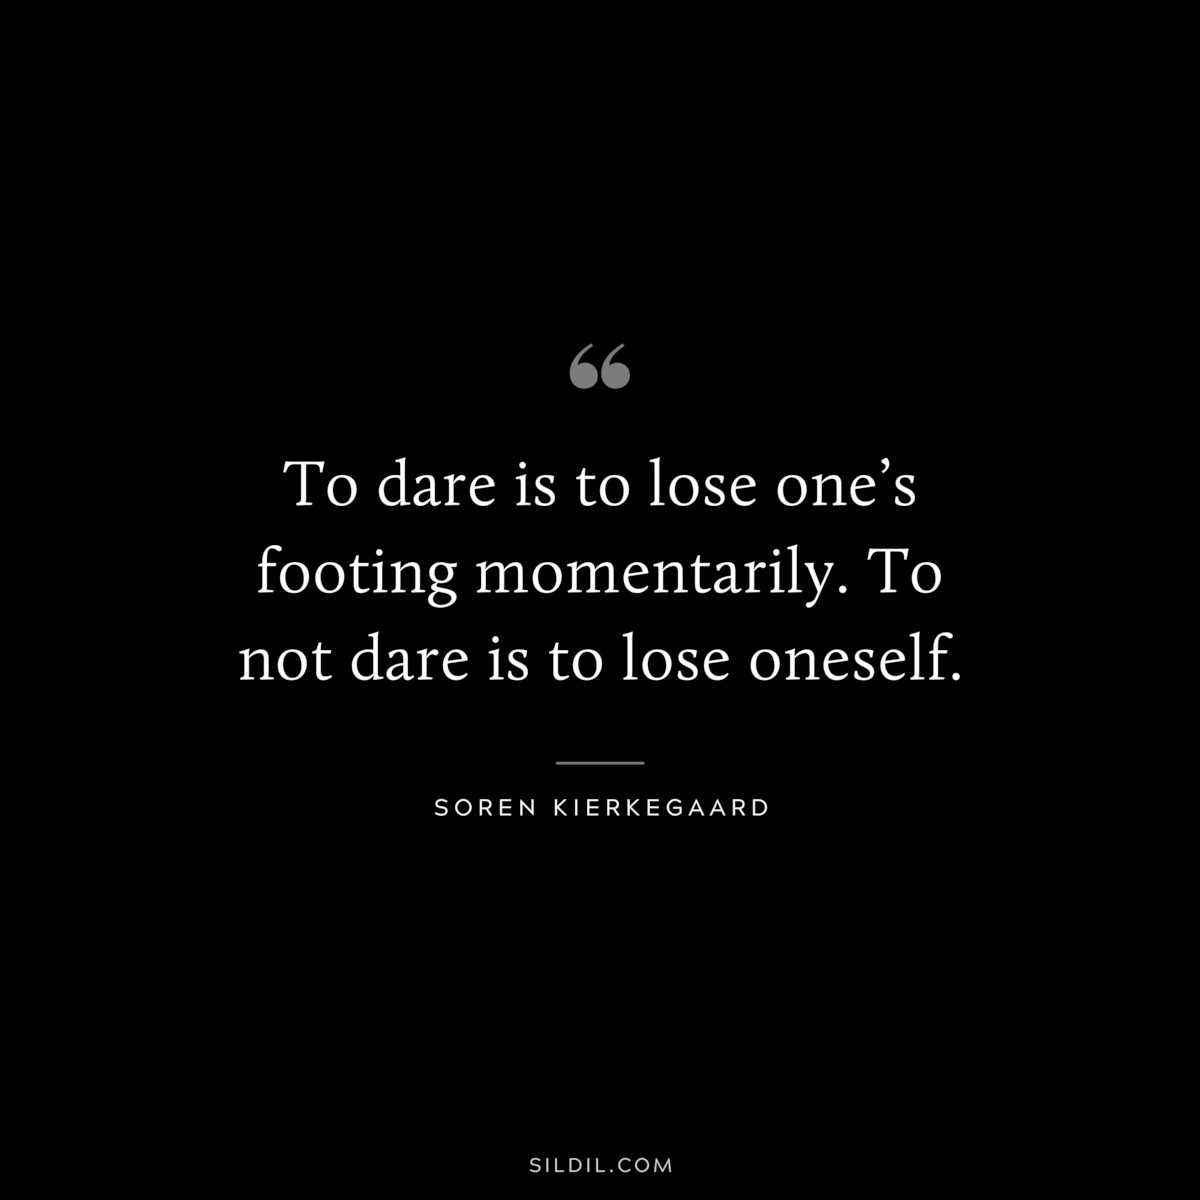 To dare is to lose one’s footing momentarily. To not dare is to lose oneself. ― Soren Kierkegaard